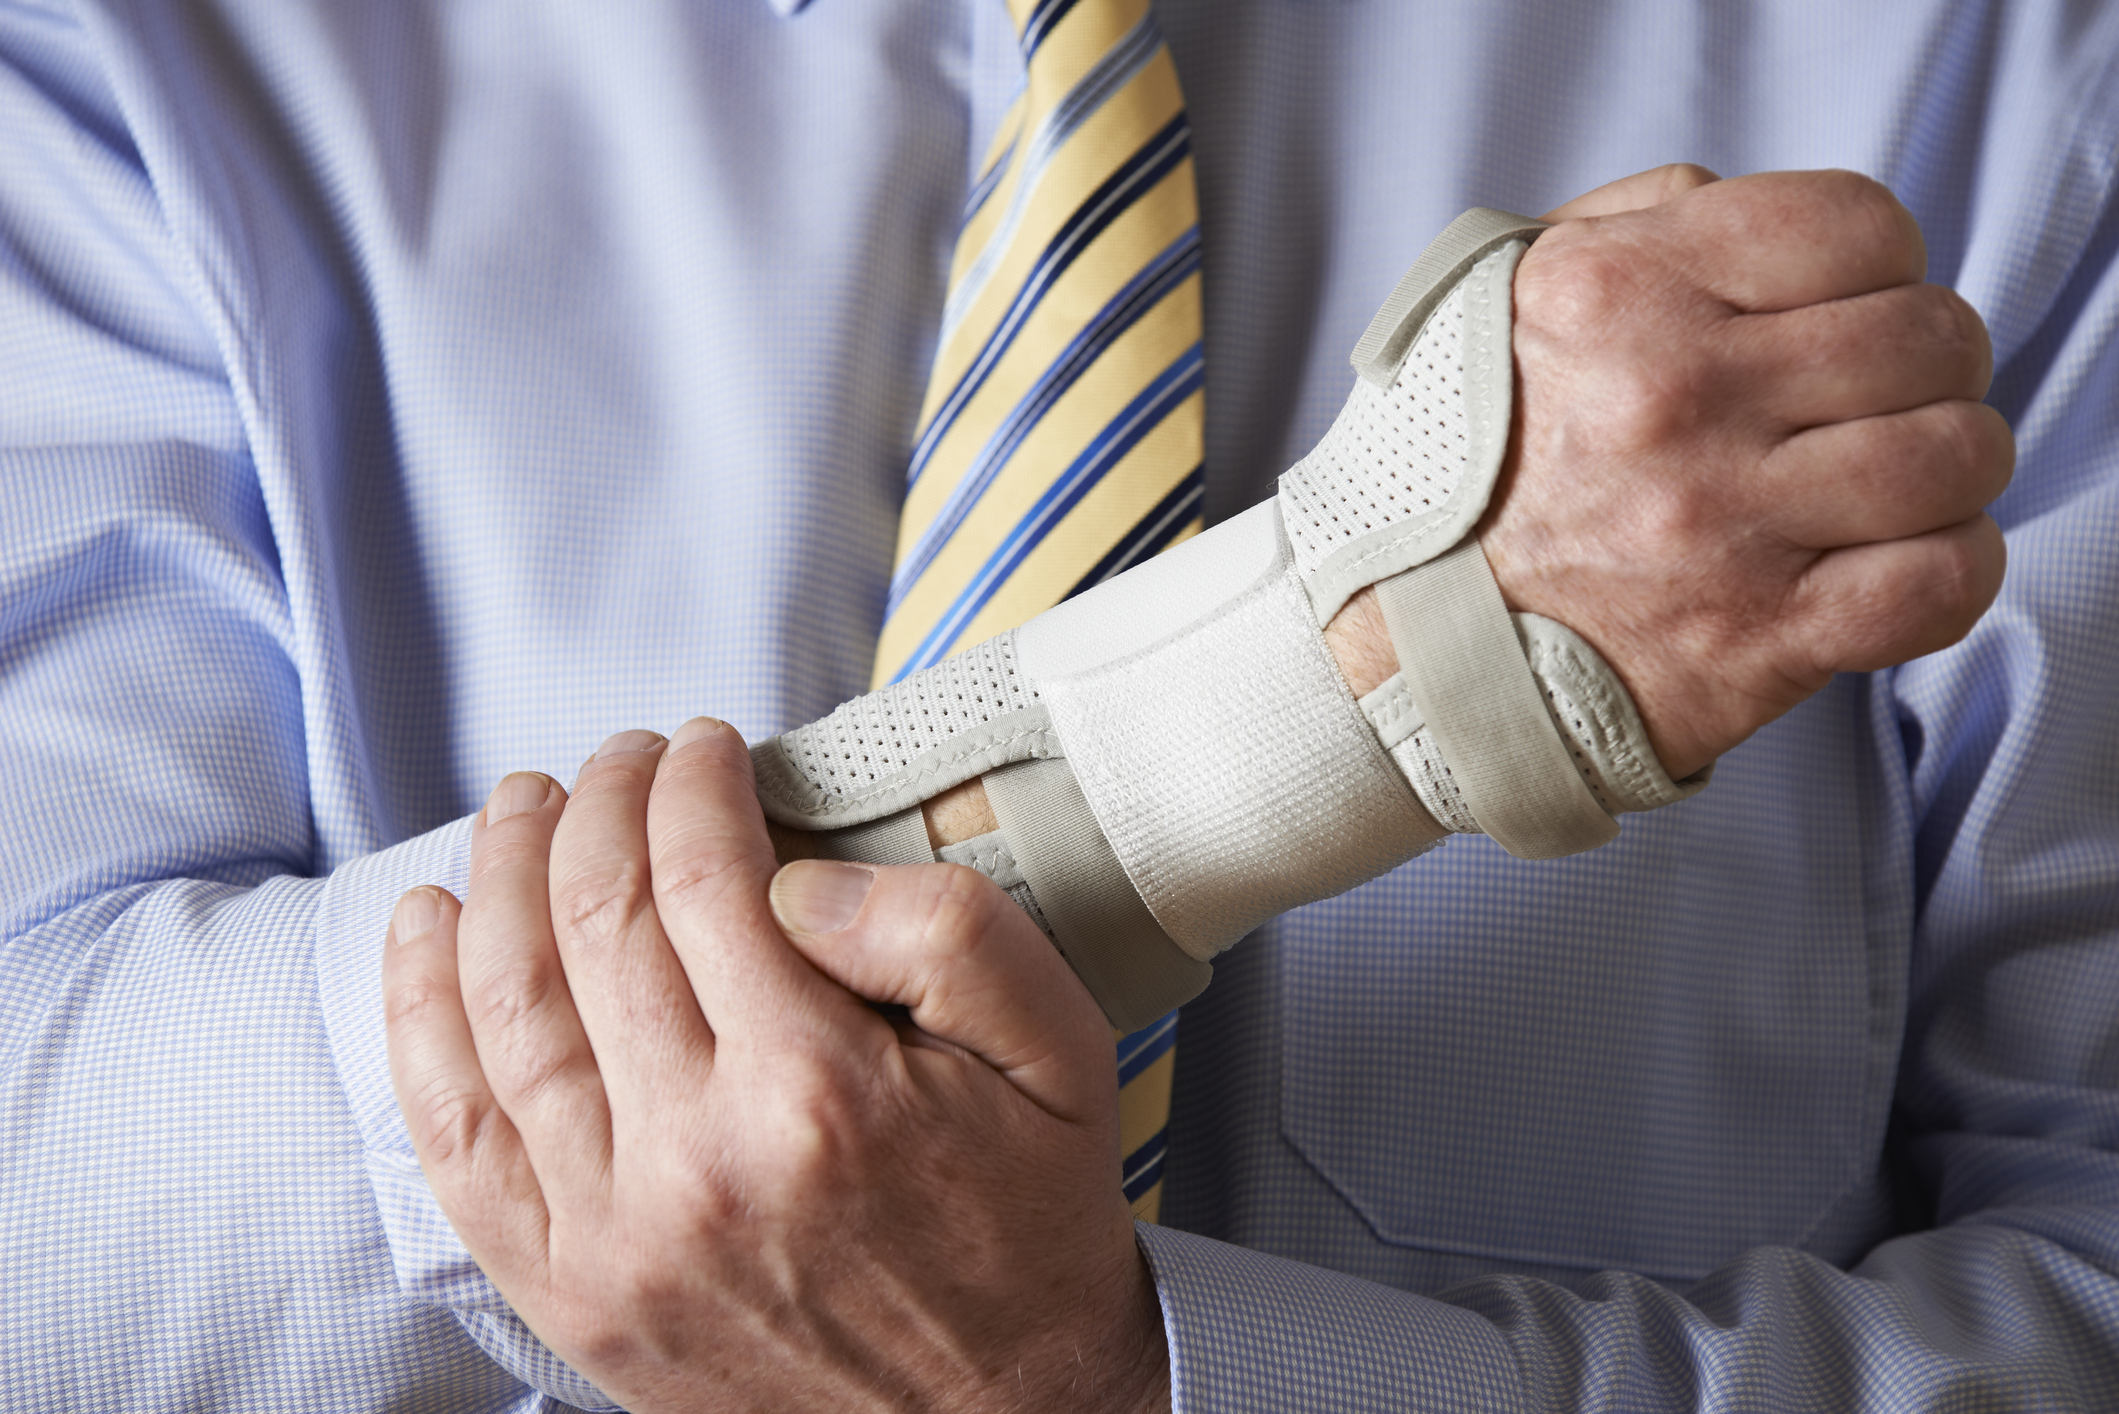 A Riverside workers' compensation attorney can help you obtain temporary or permanent disability benefits